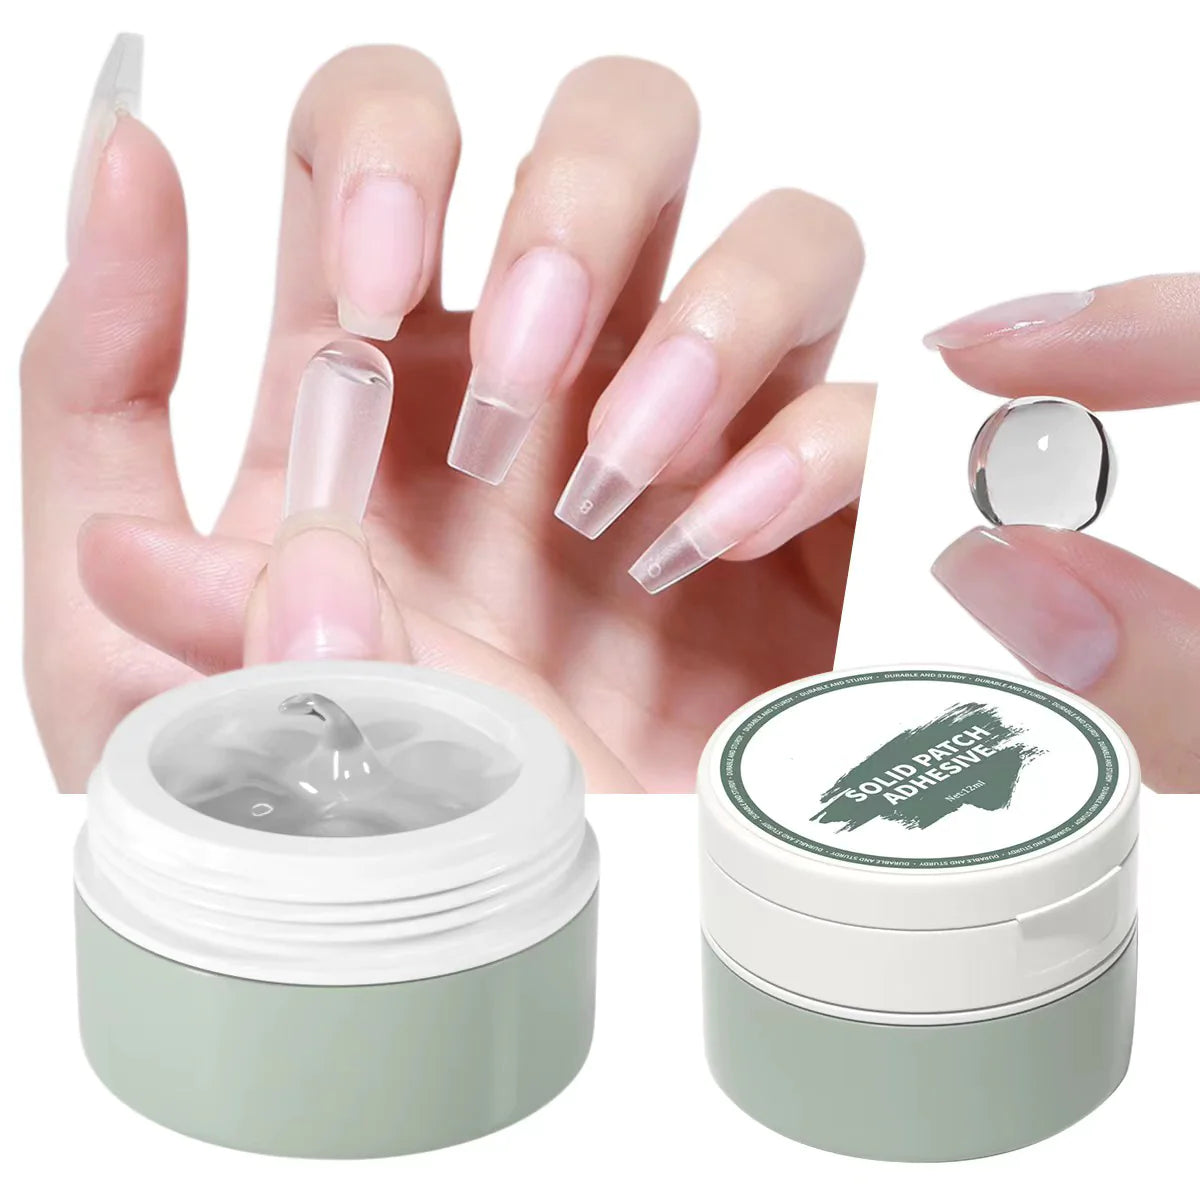 Fast Free Shipping Today | Solid Nail Glue